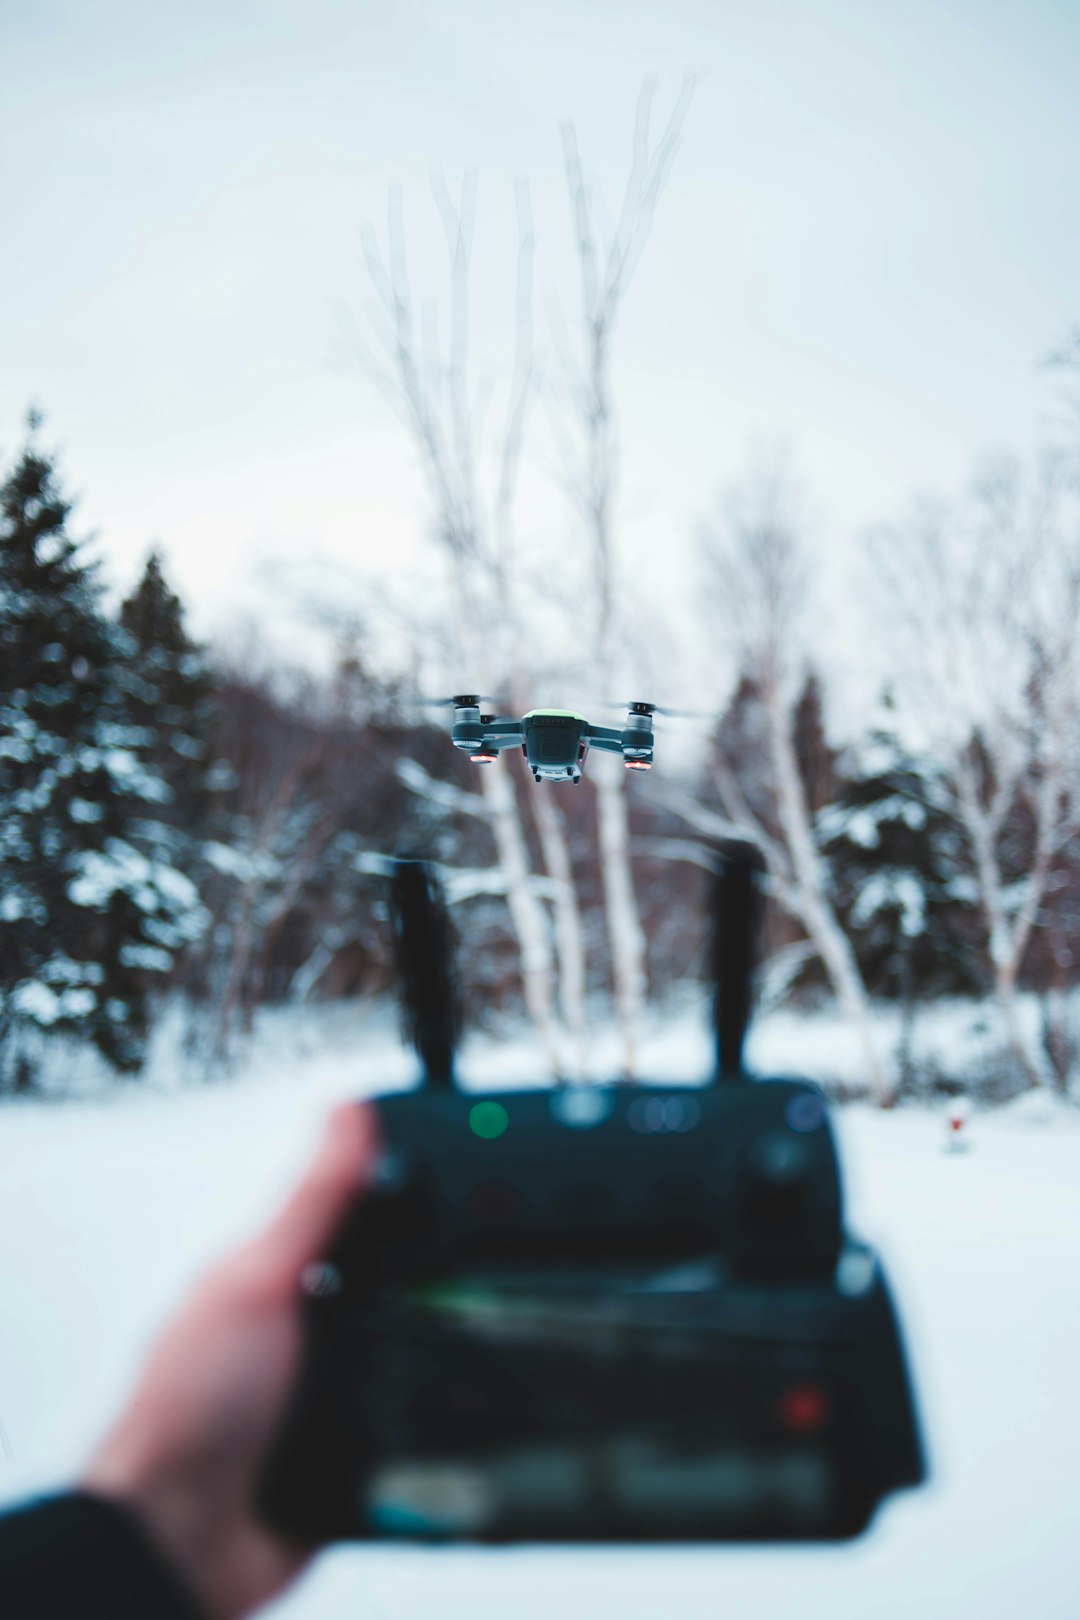 timelapse photography of a drone in flight